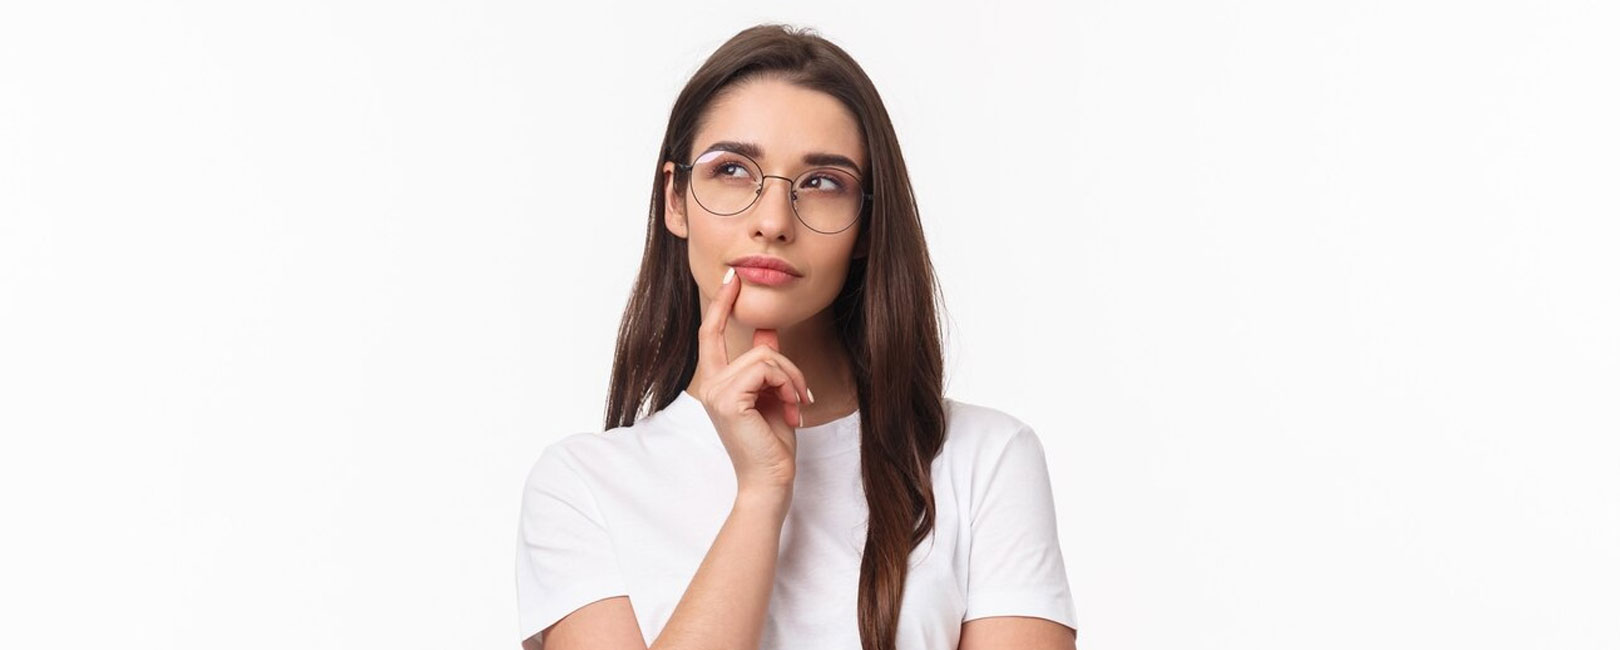 A young woman wearing glasses is thinking about the symptoms of underbite teeth